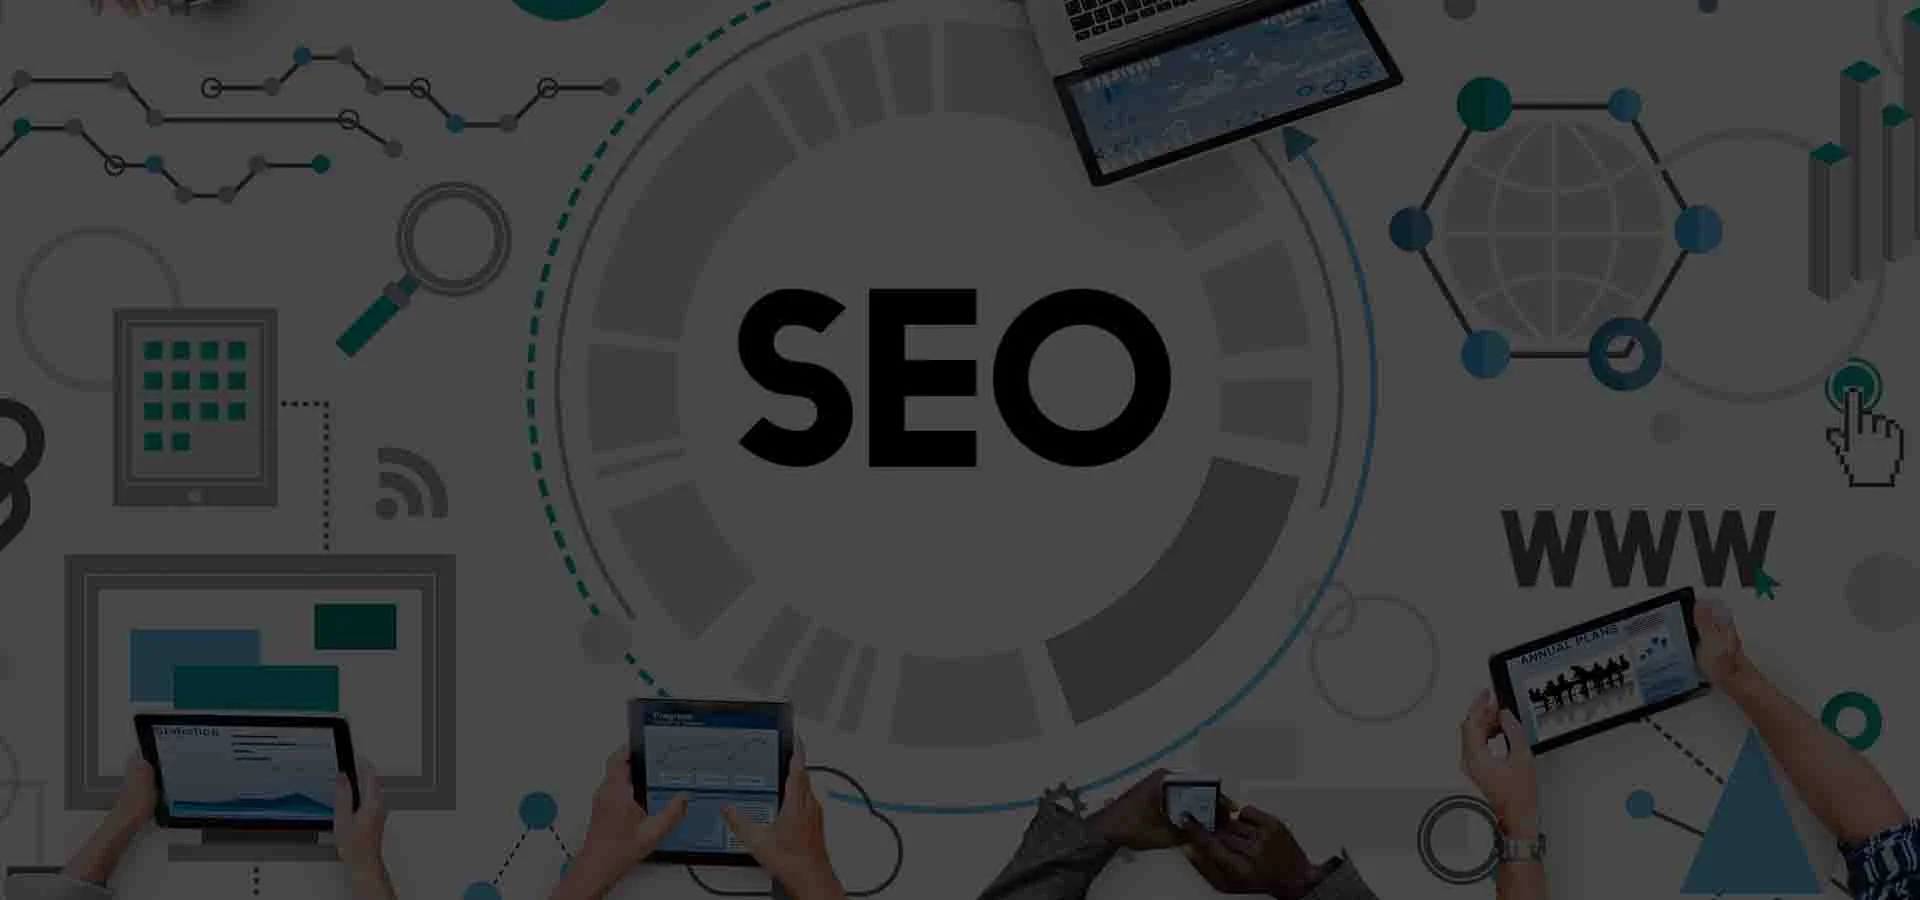 what-are-the-top-10-seo-tactics-beneficial-for-businesses-in-2020-related-blog-21